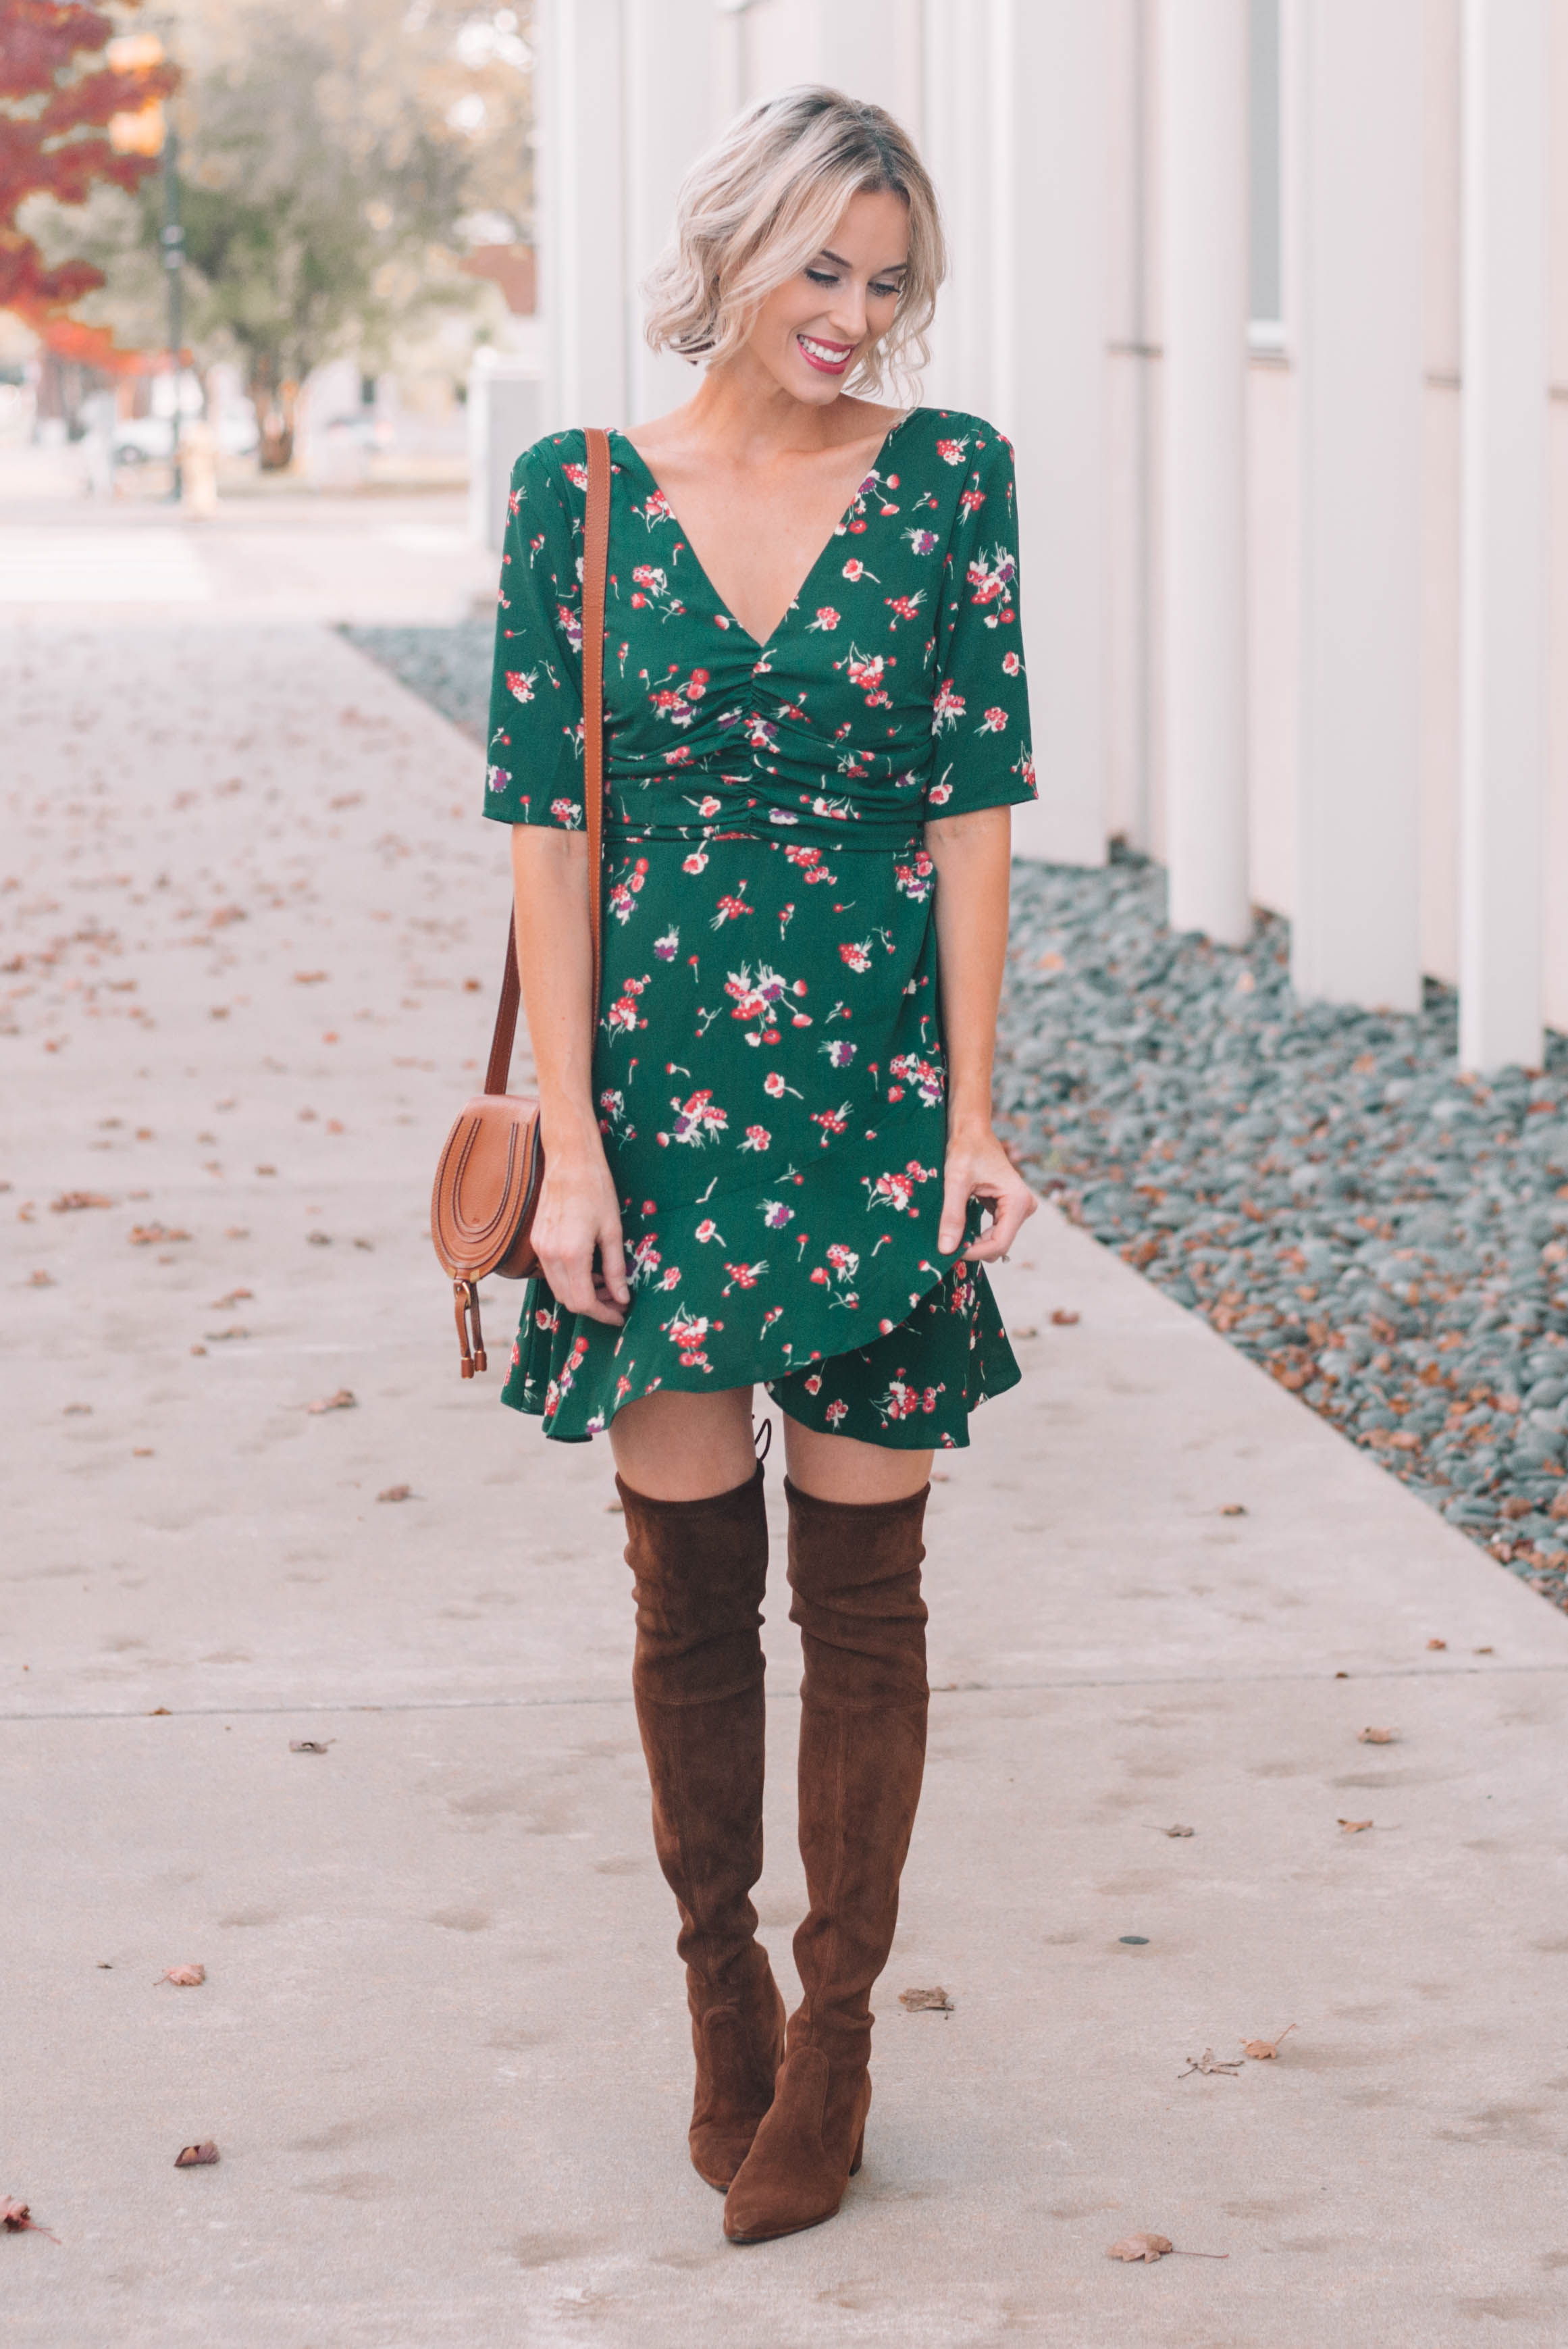 How to Wear Over the Knee Boots 